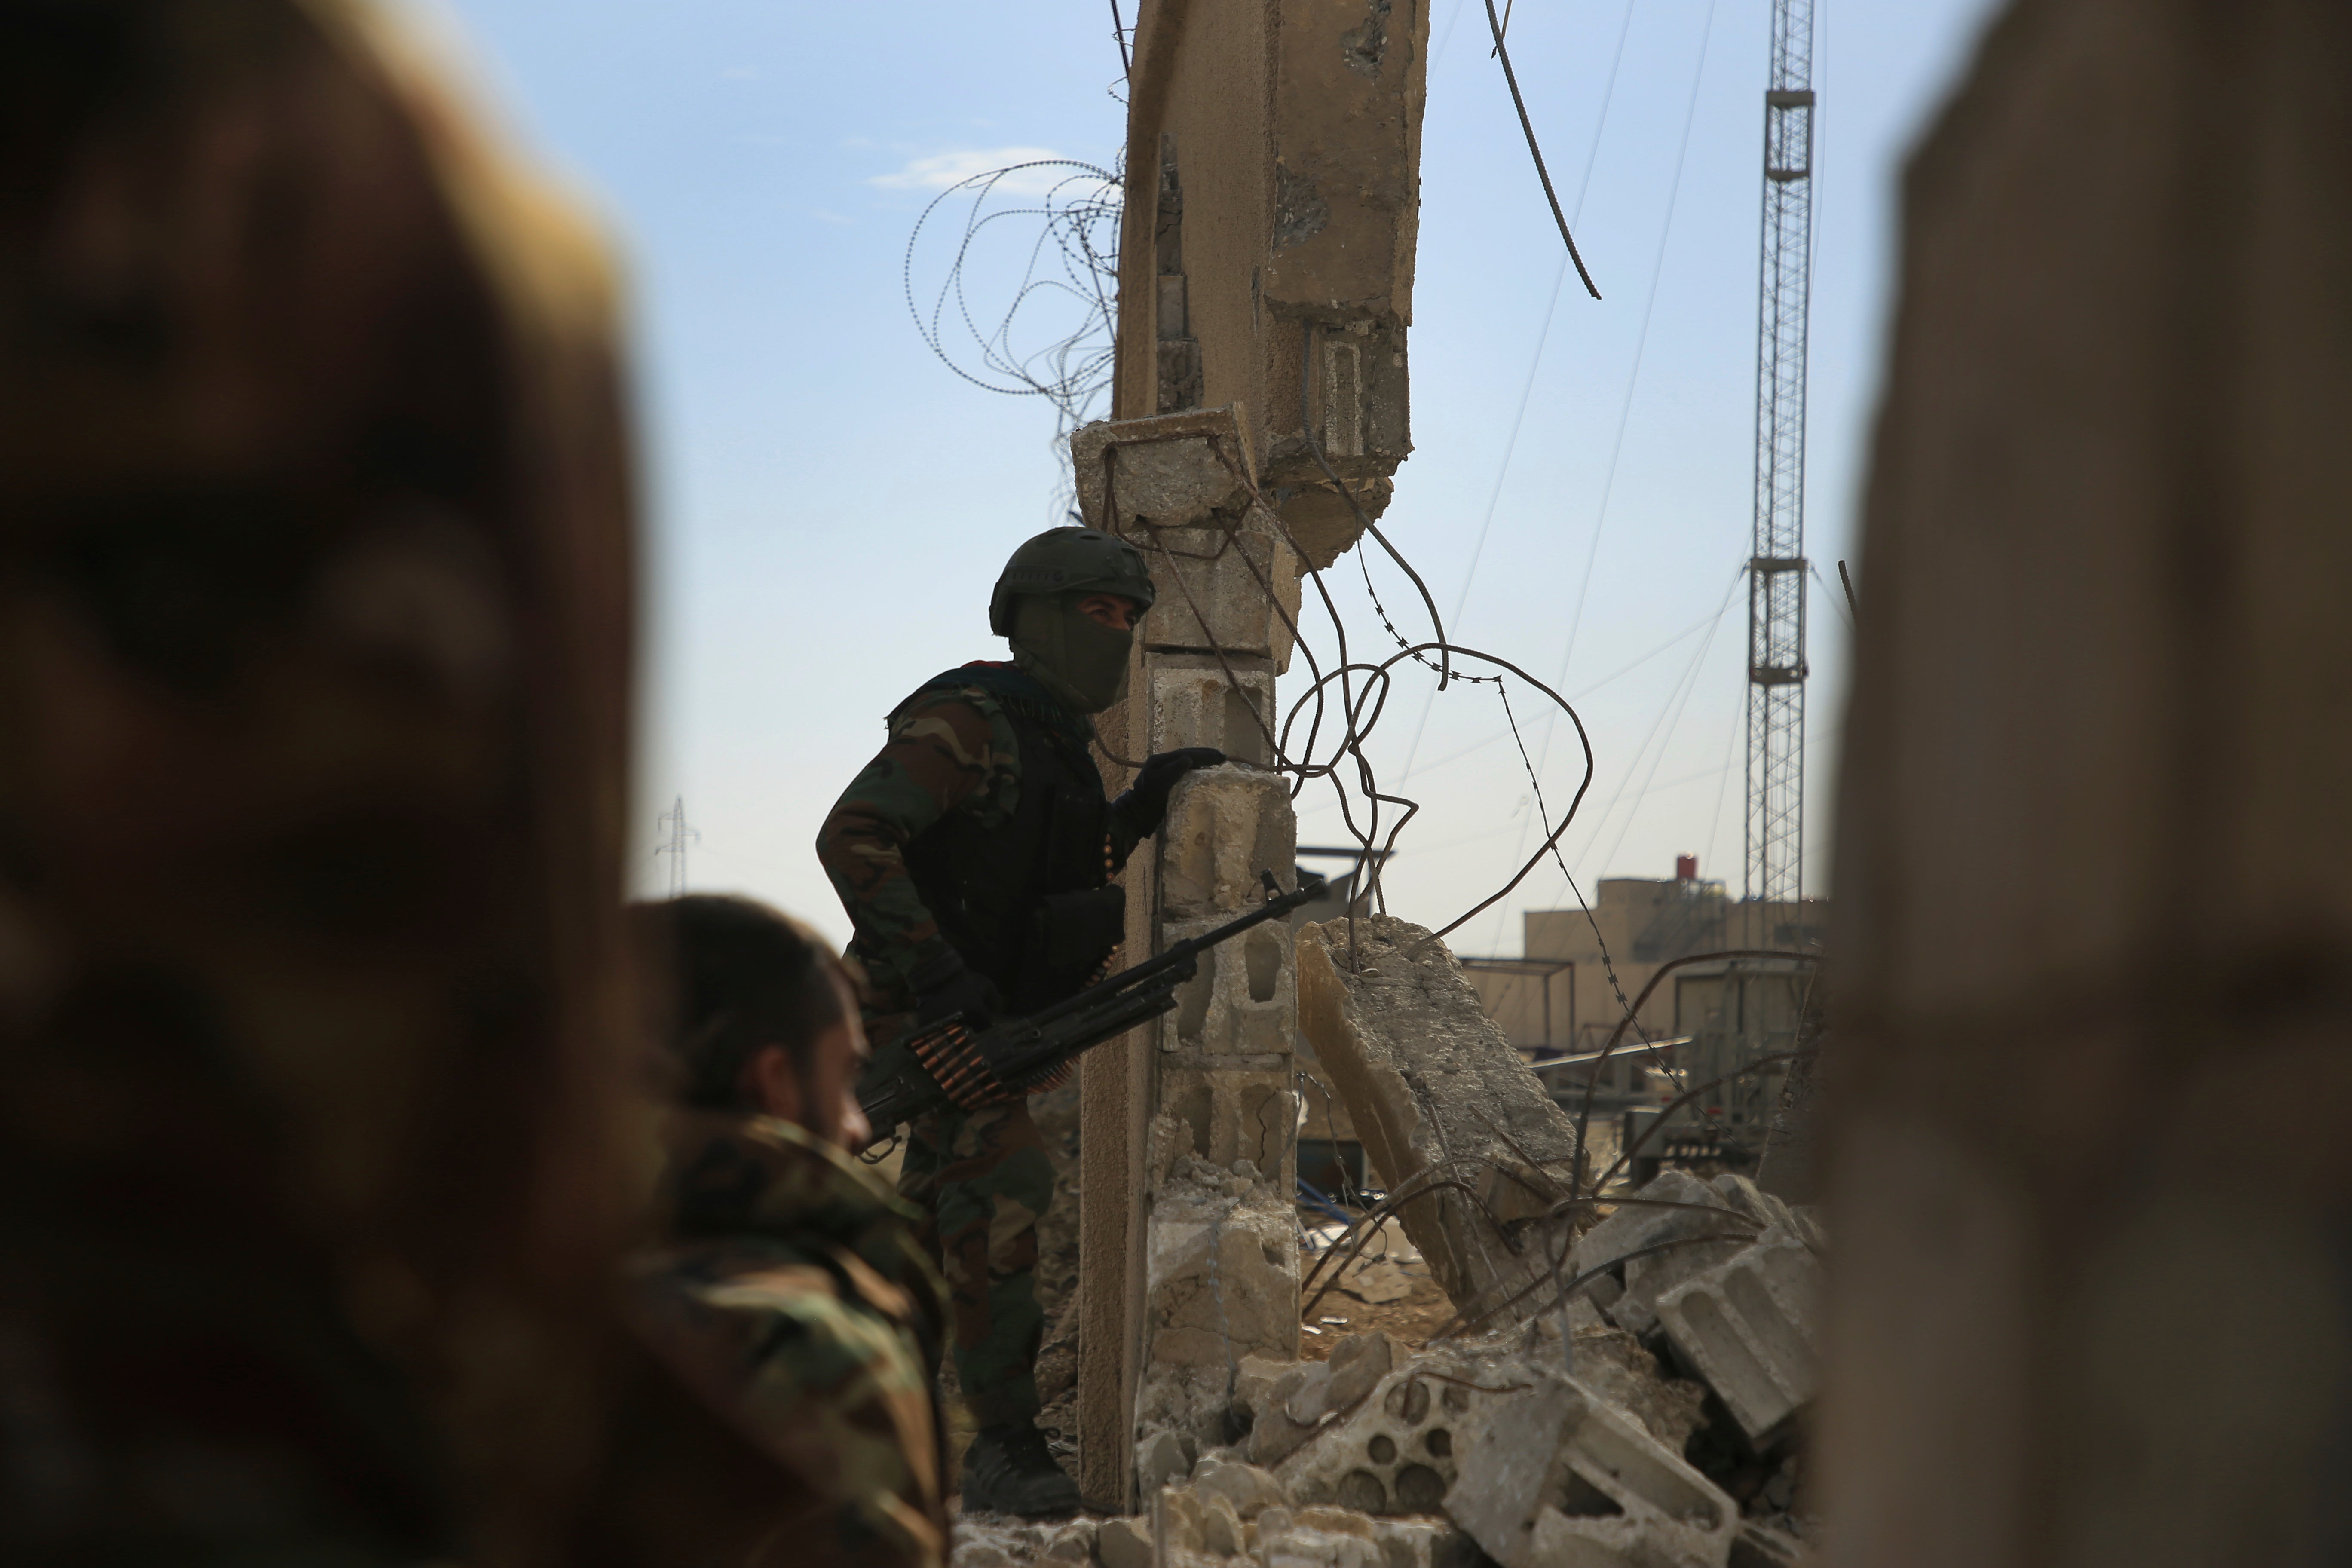 Kurdish-led Syrian Democratic Forces fighters take their positions at the defense wall of Gweiran prison in Hassakeh, northeast Syria, 23 January 2022